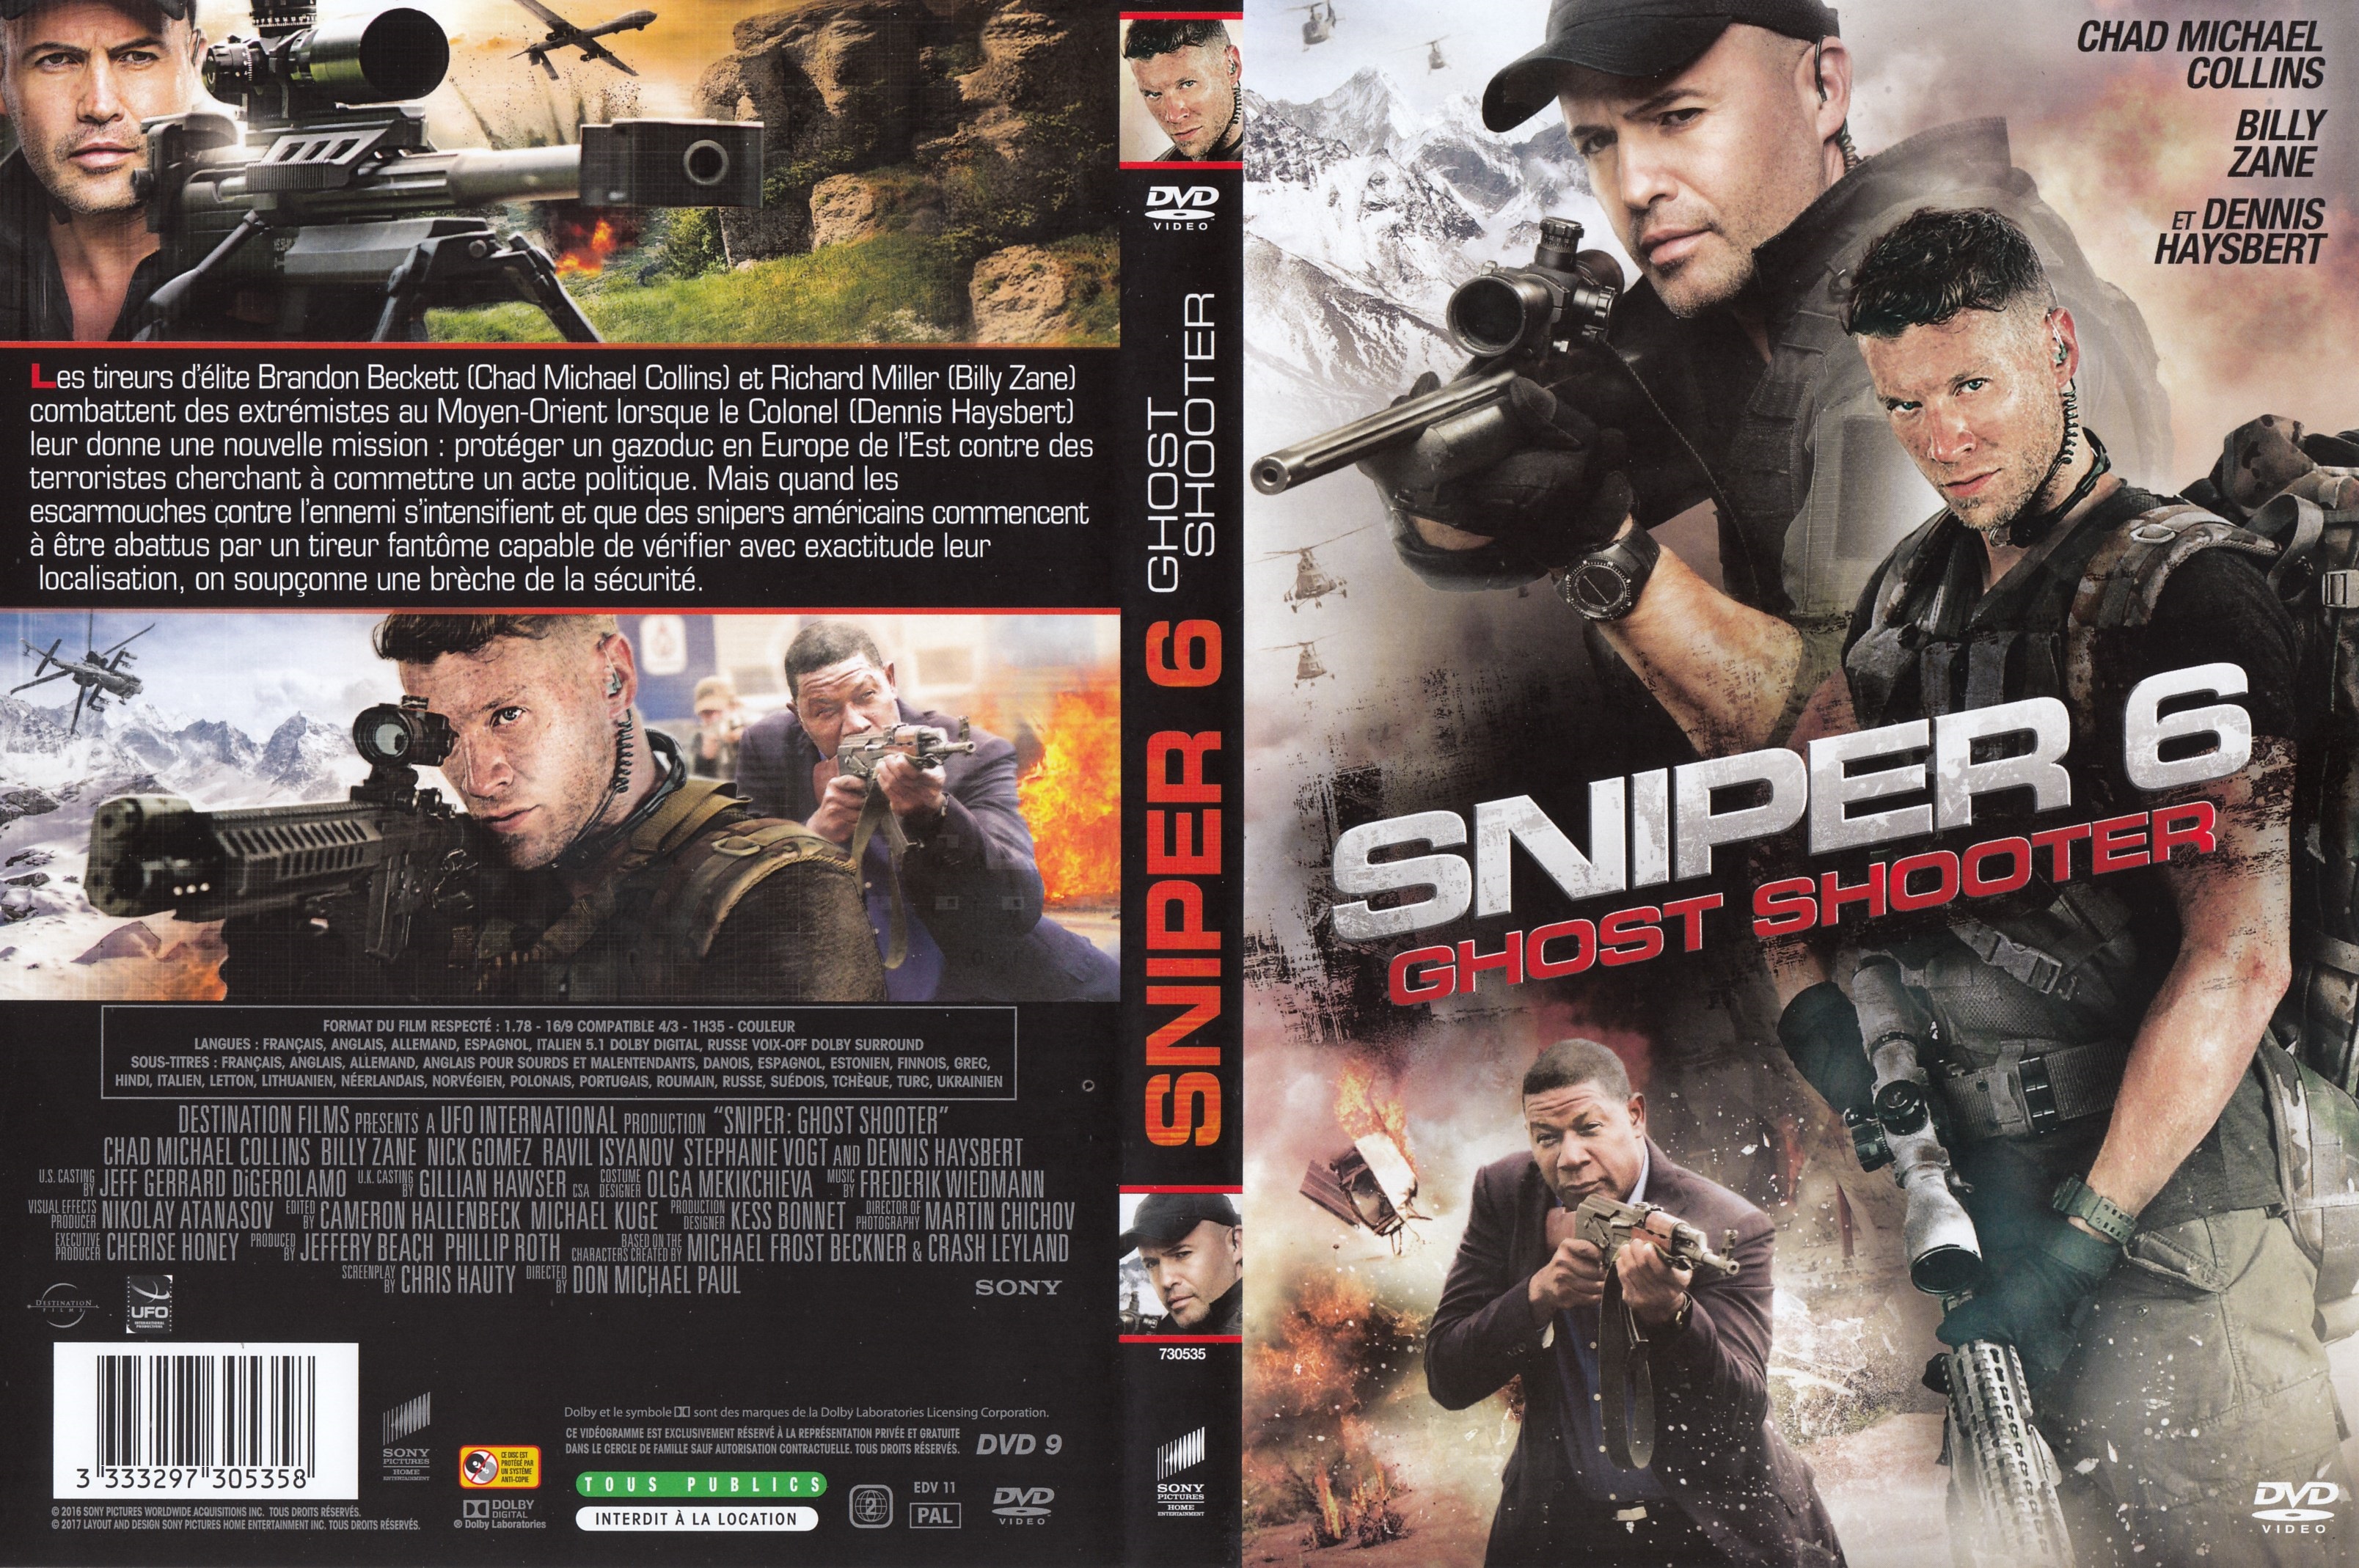 Jaquette DVD Sniper 6 Ghost shooter